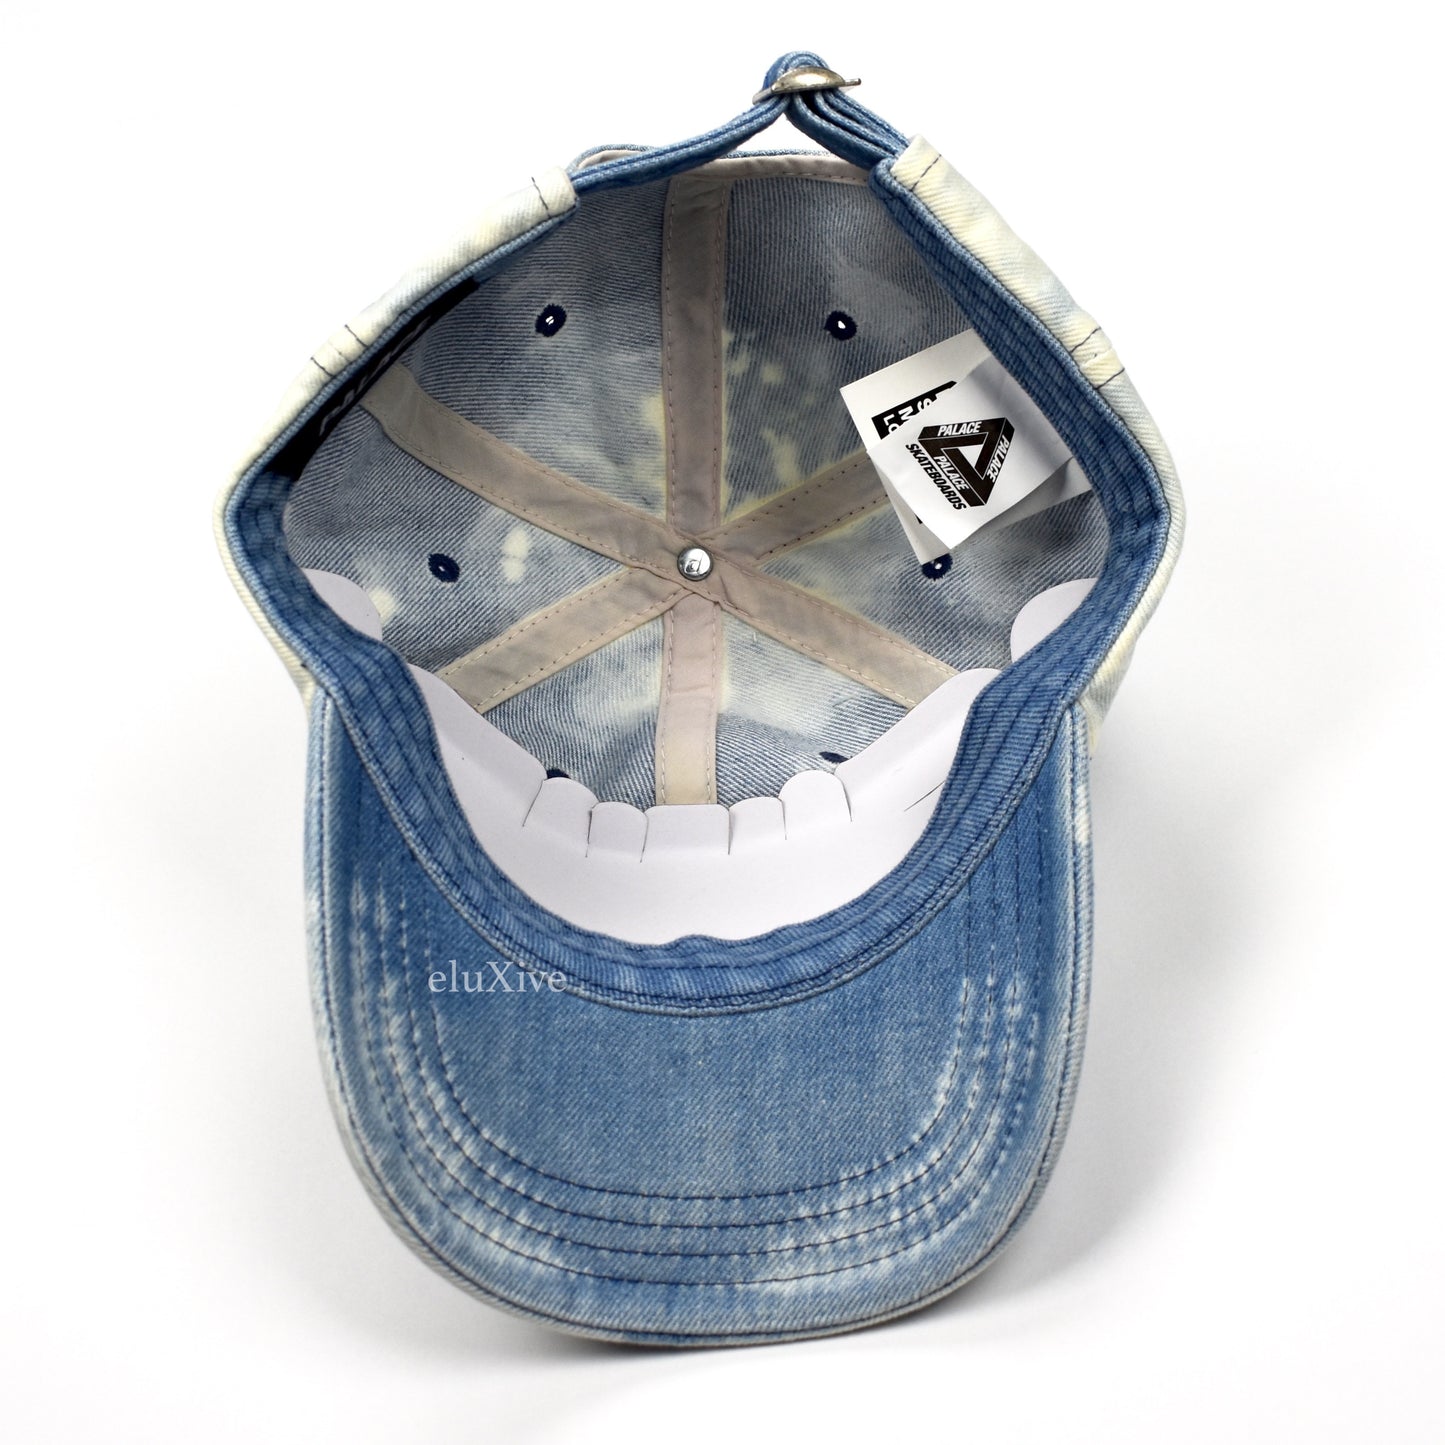 Palace - Chilly Duck P-Logo Hat (Bleached Denim)